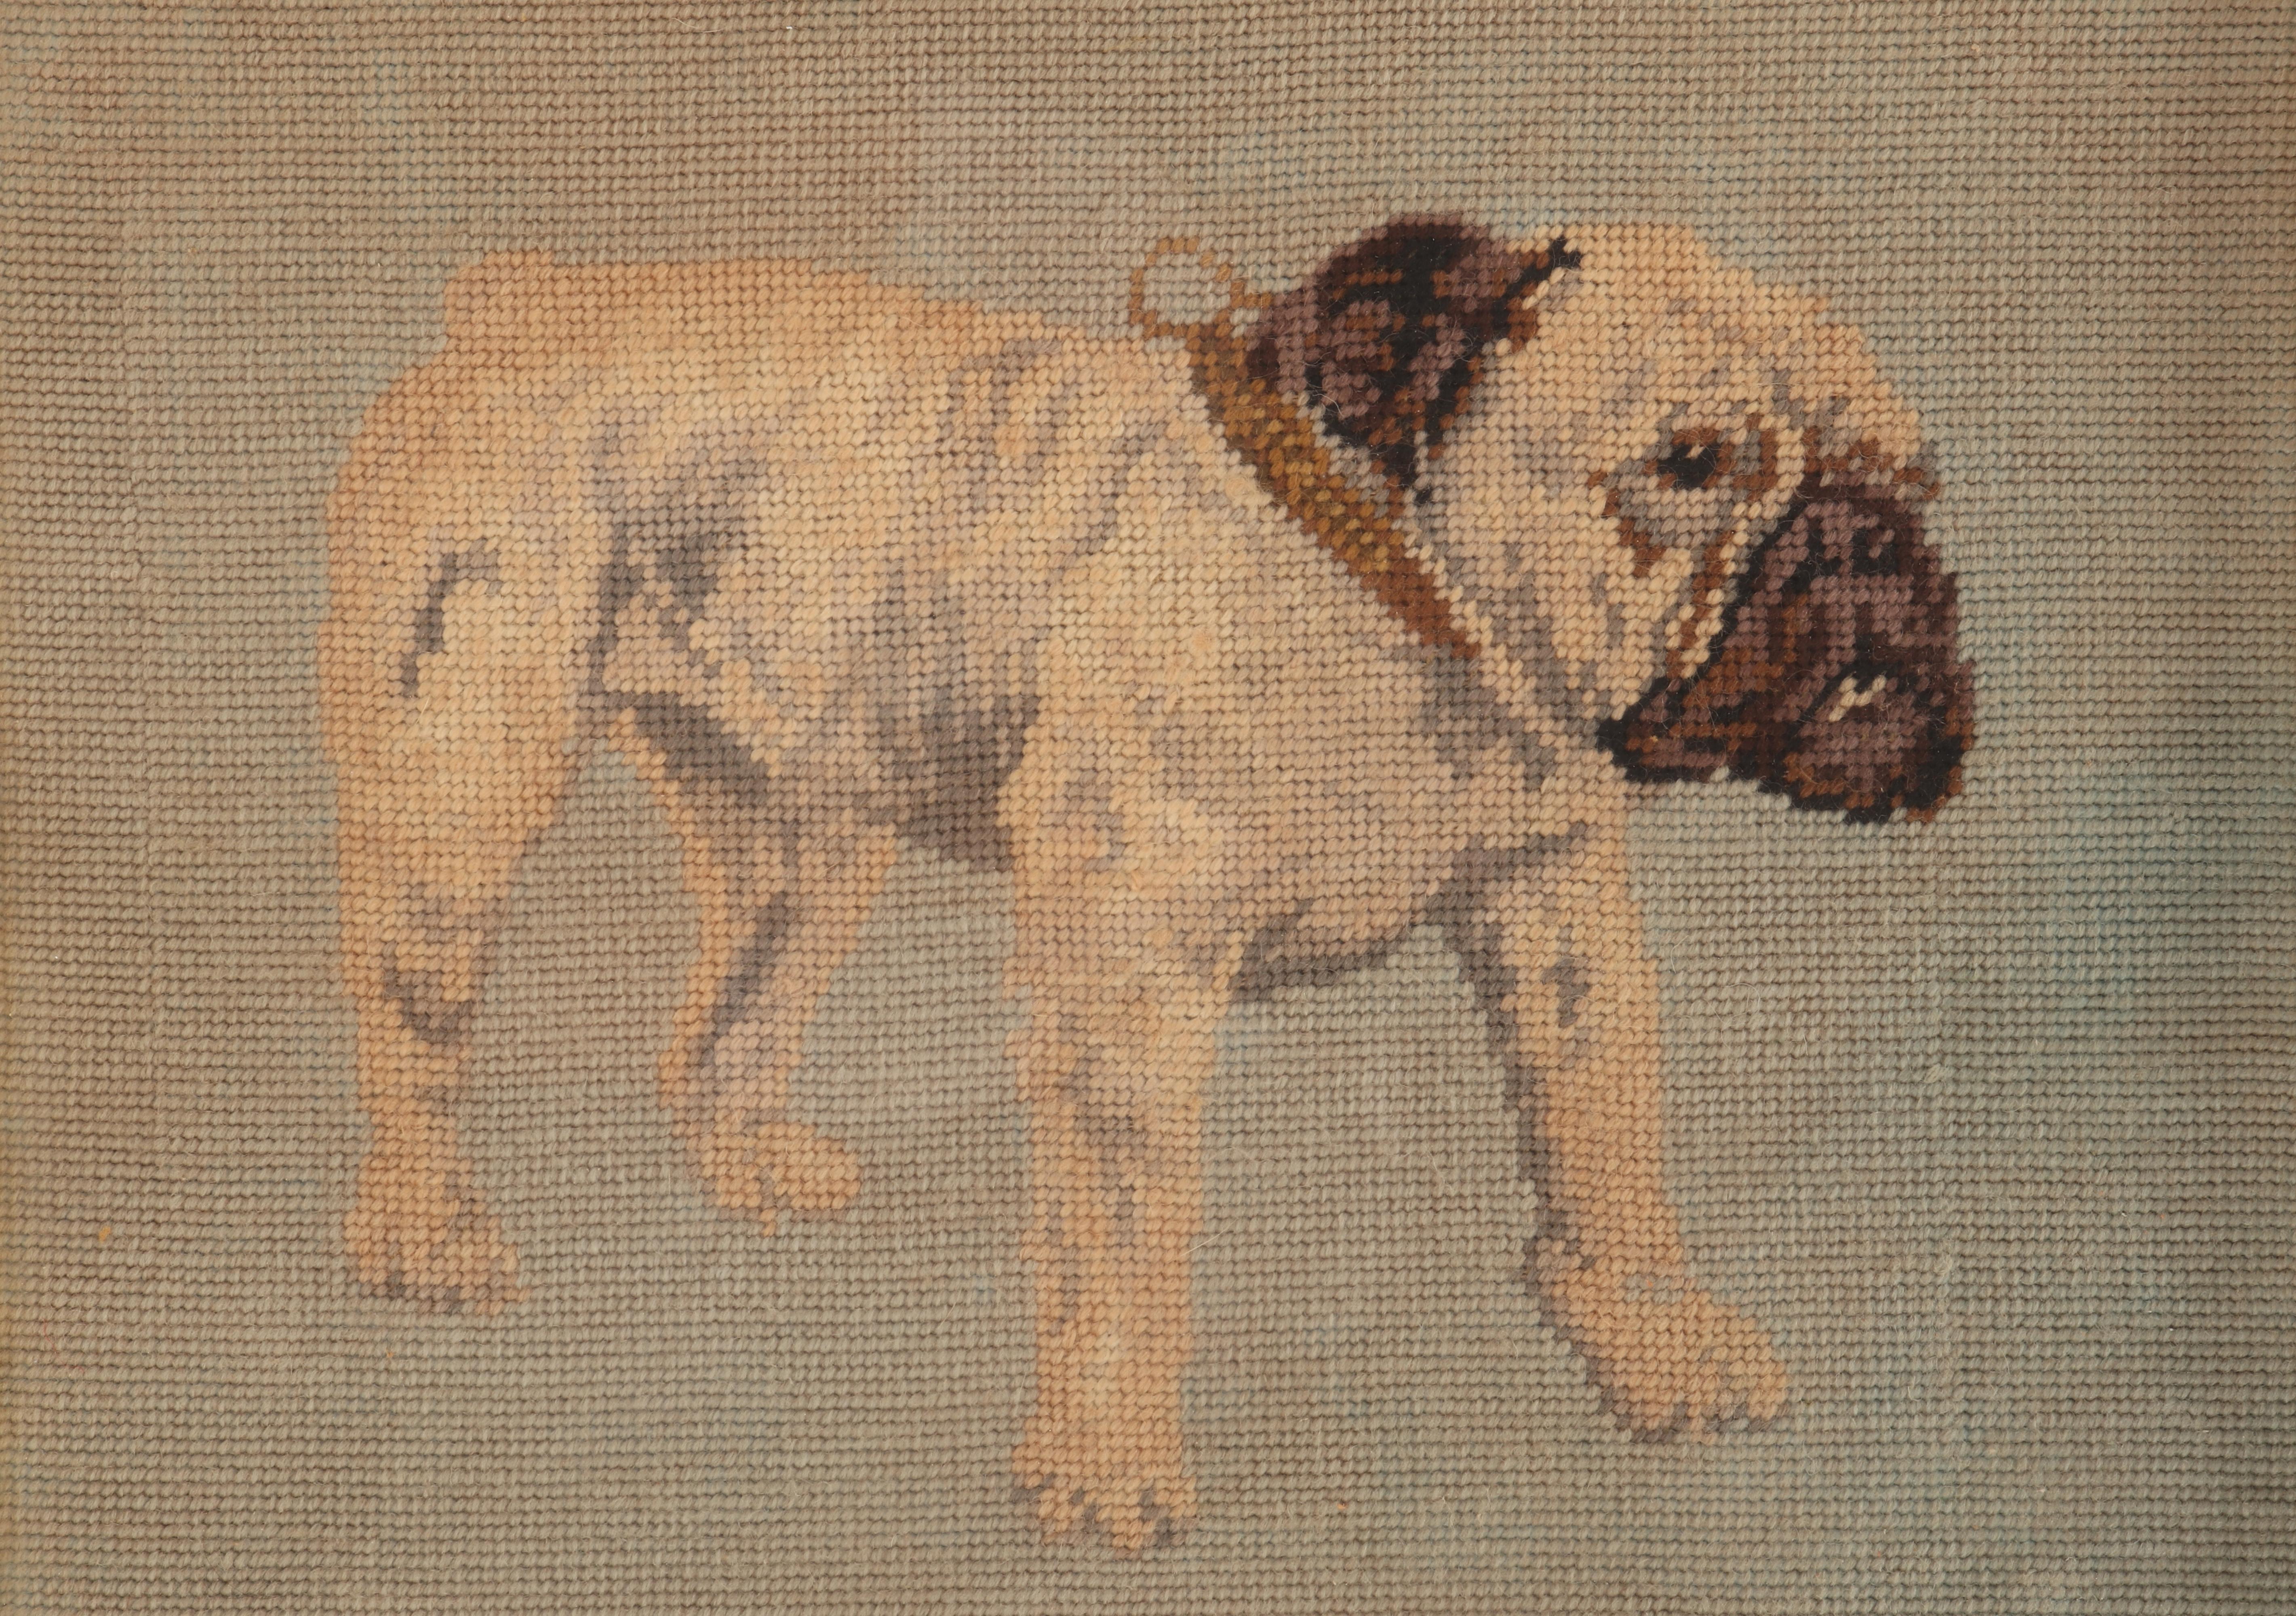 A framed small stitch embroidery (petit-point), depicting a bulldog. Golden painted wooden frame. Austria, circa 1880.